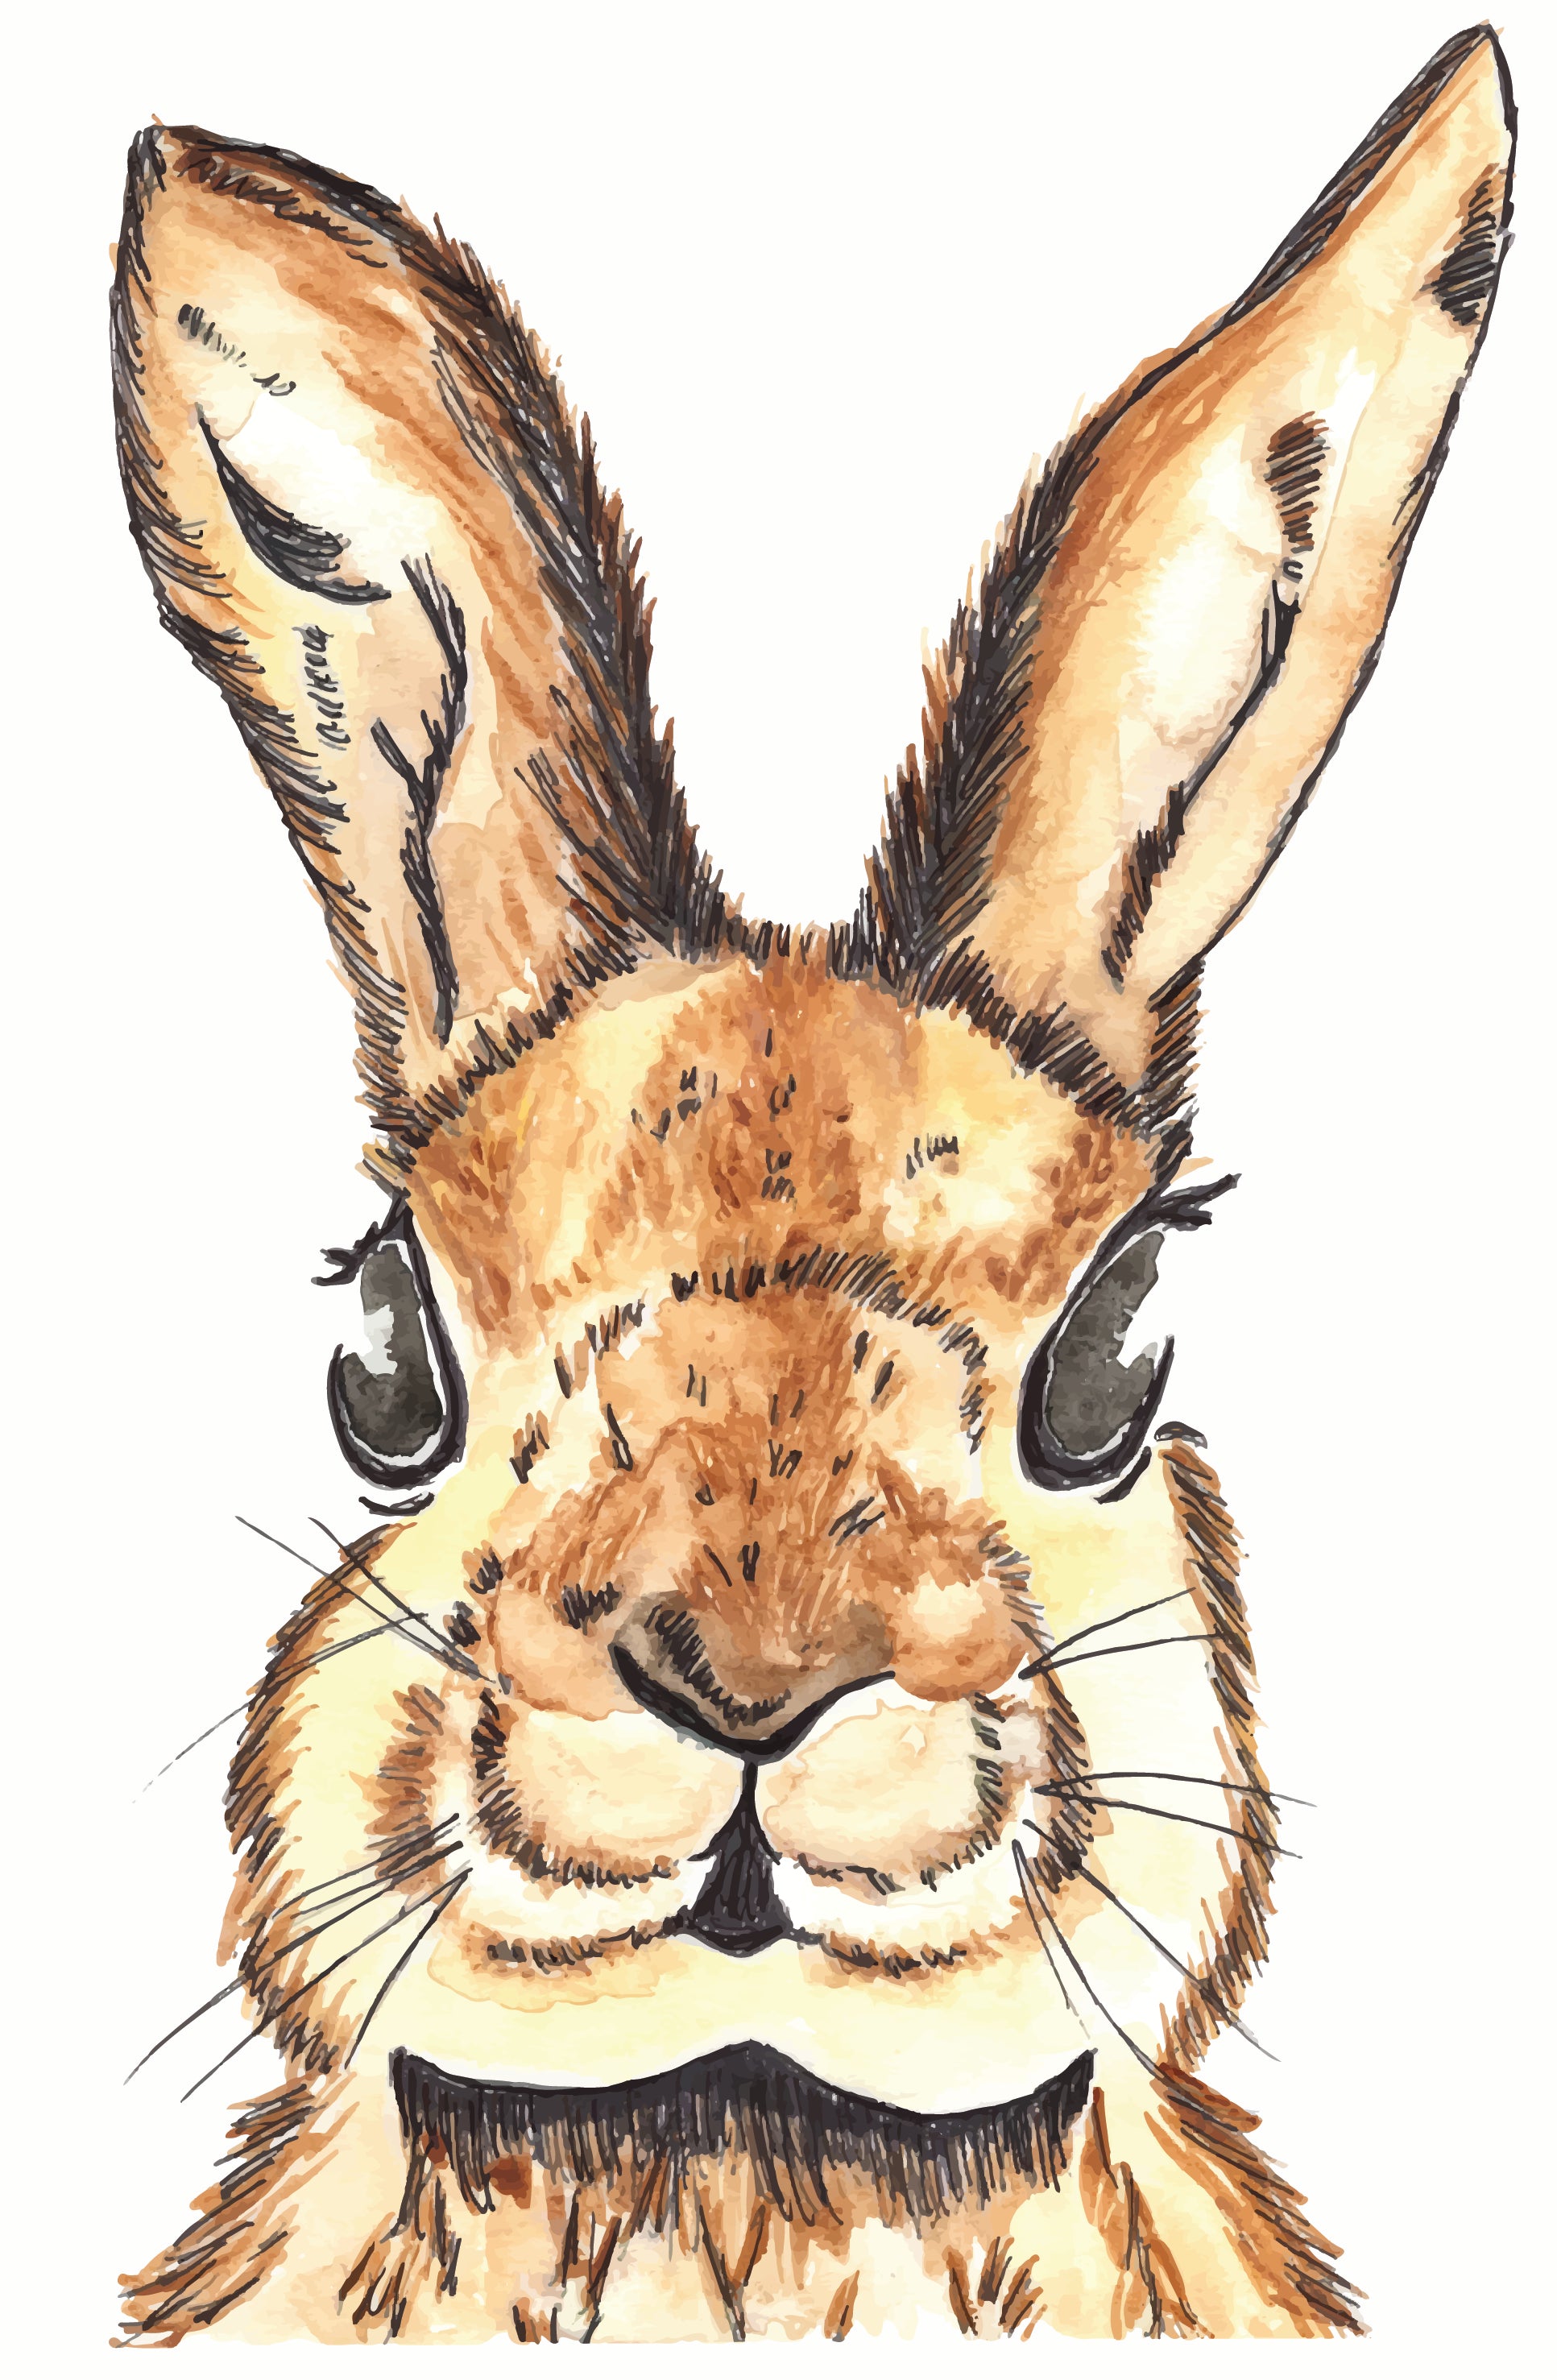 The Perfect Rabbit is just that…a cute, whimsical watercolor painting of the most adorable hare by Abigail Powers.